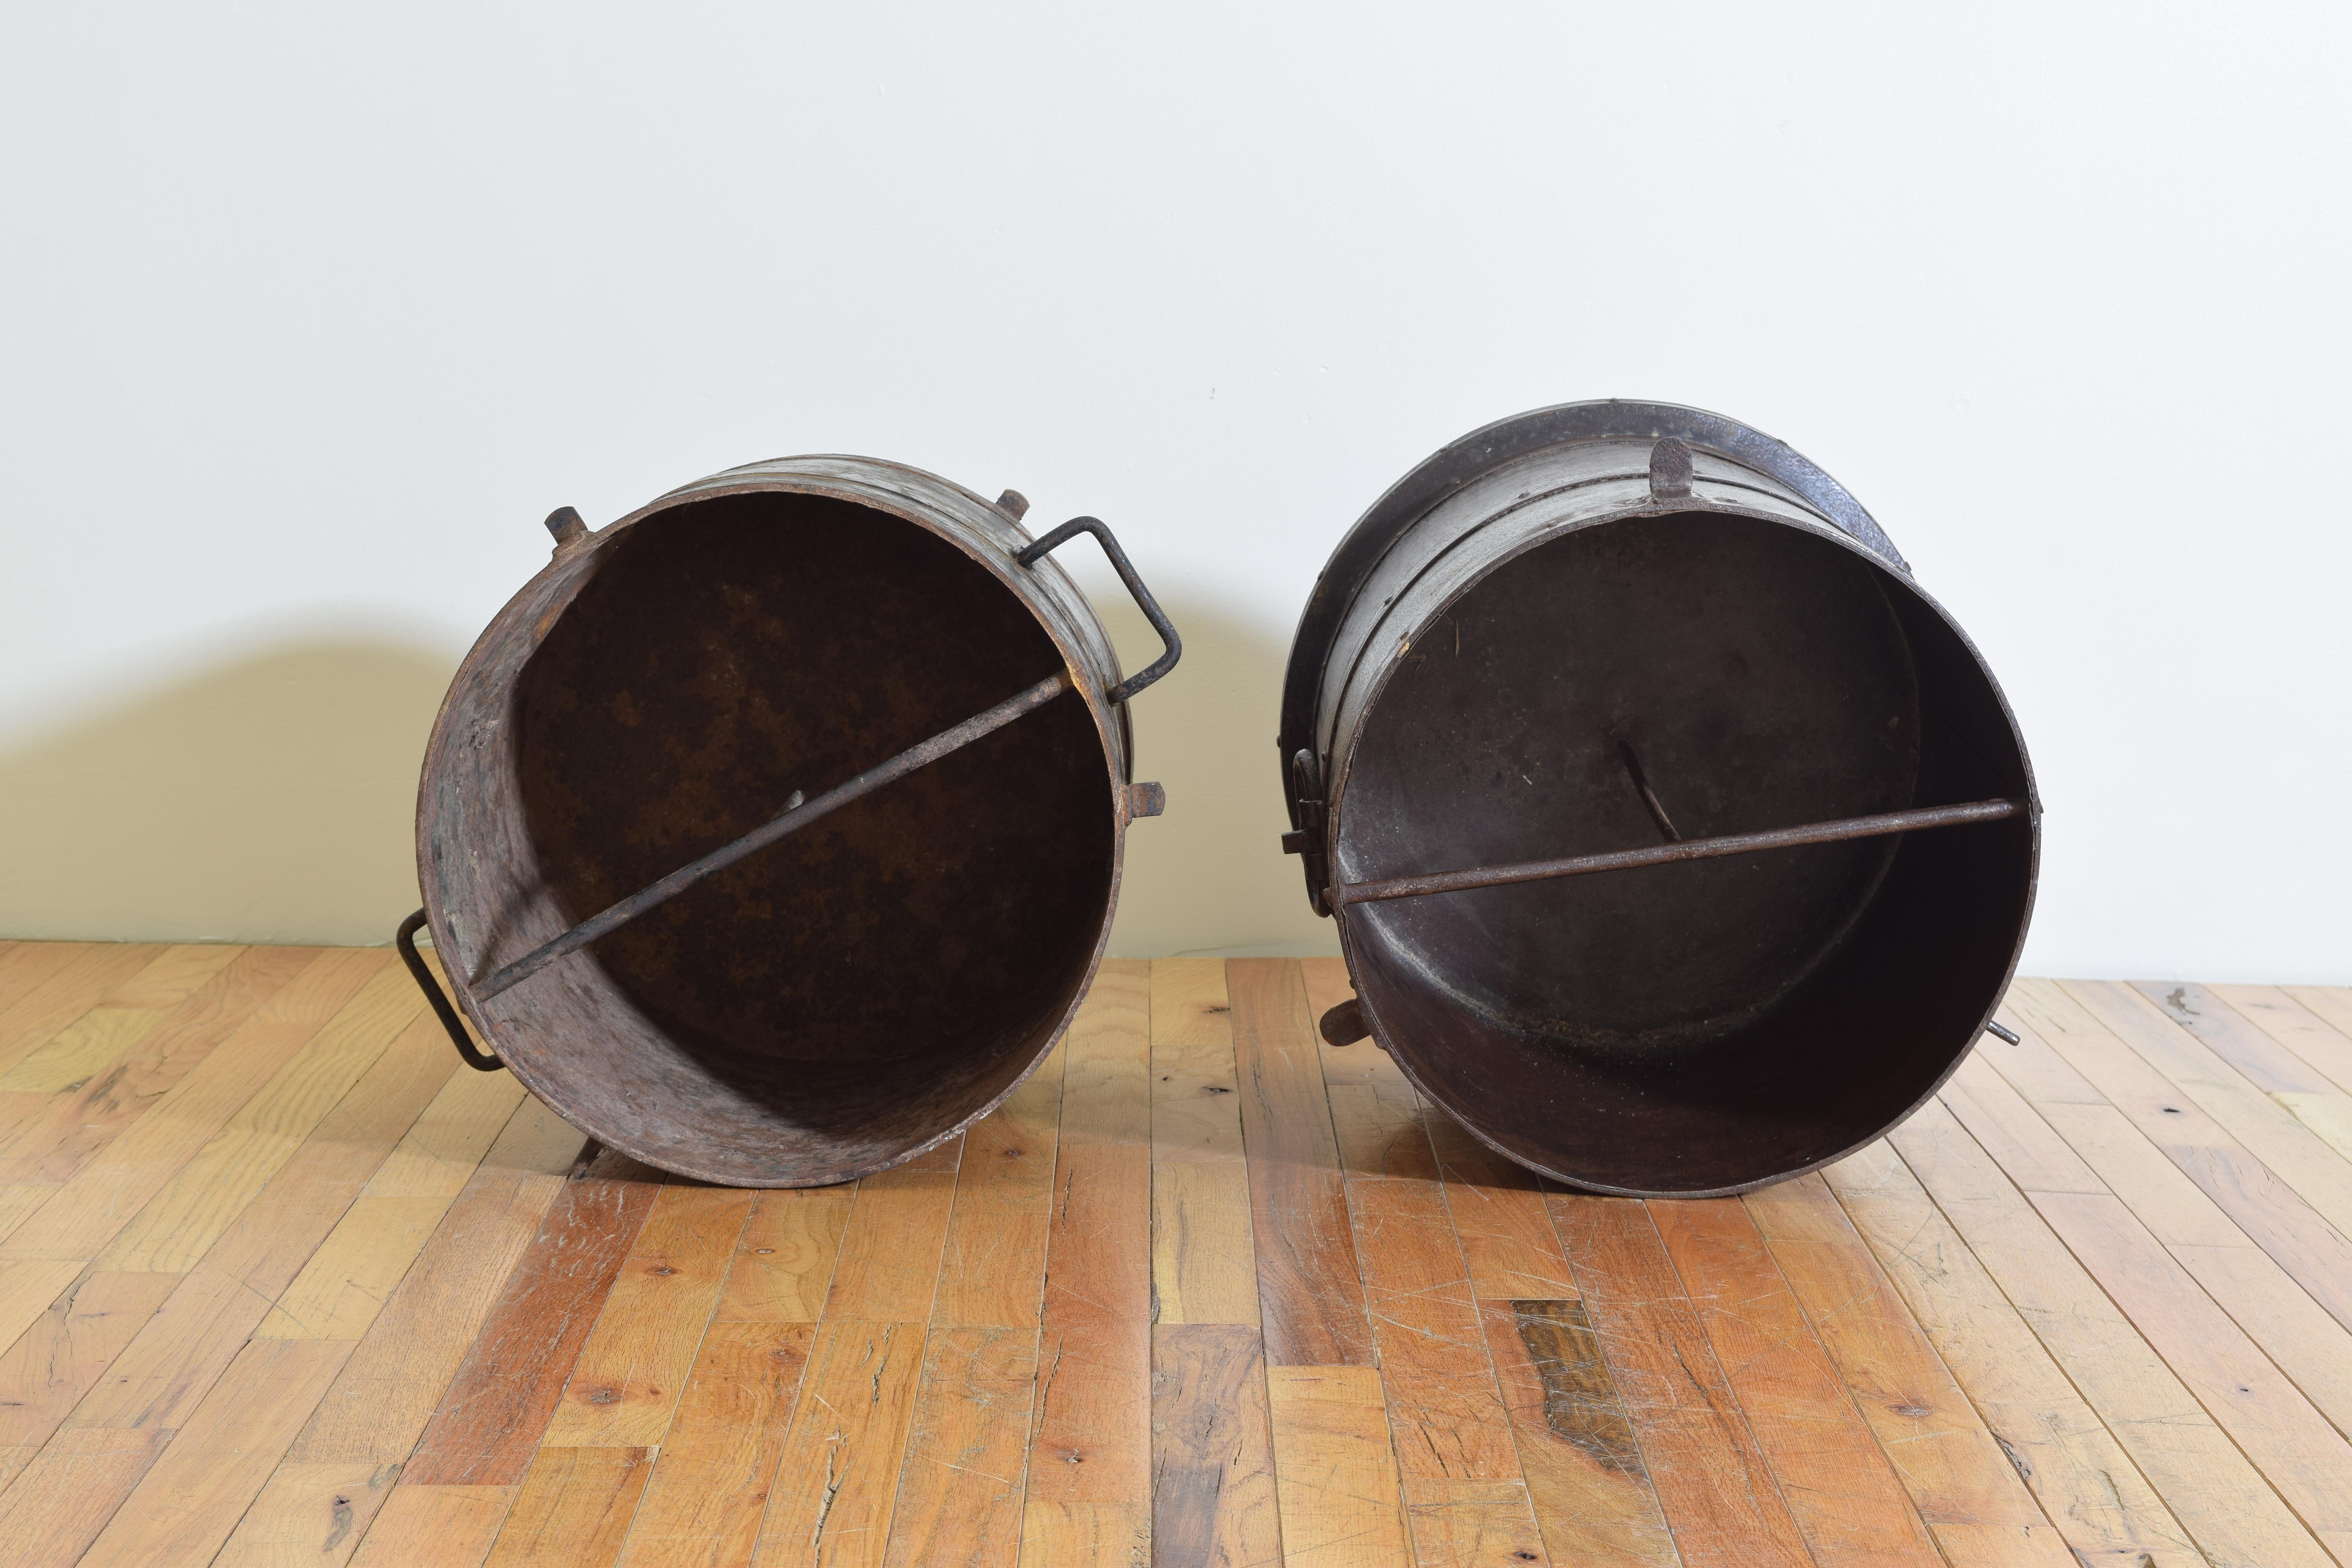 Late 19th Century Matched Pair of French Patinated and Steel Grain Measures, Demi-Hecto Litre 